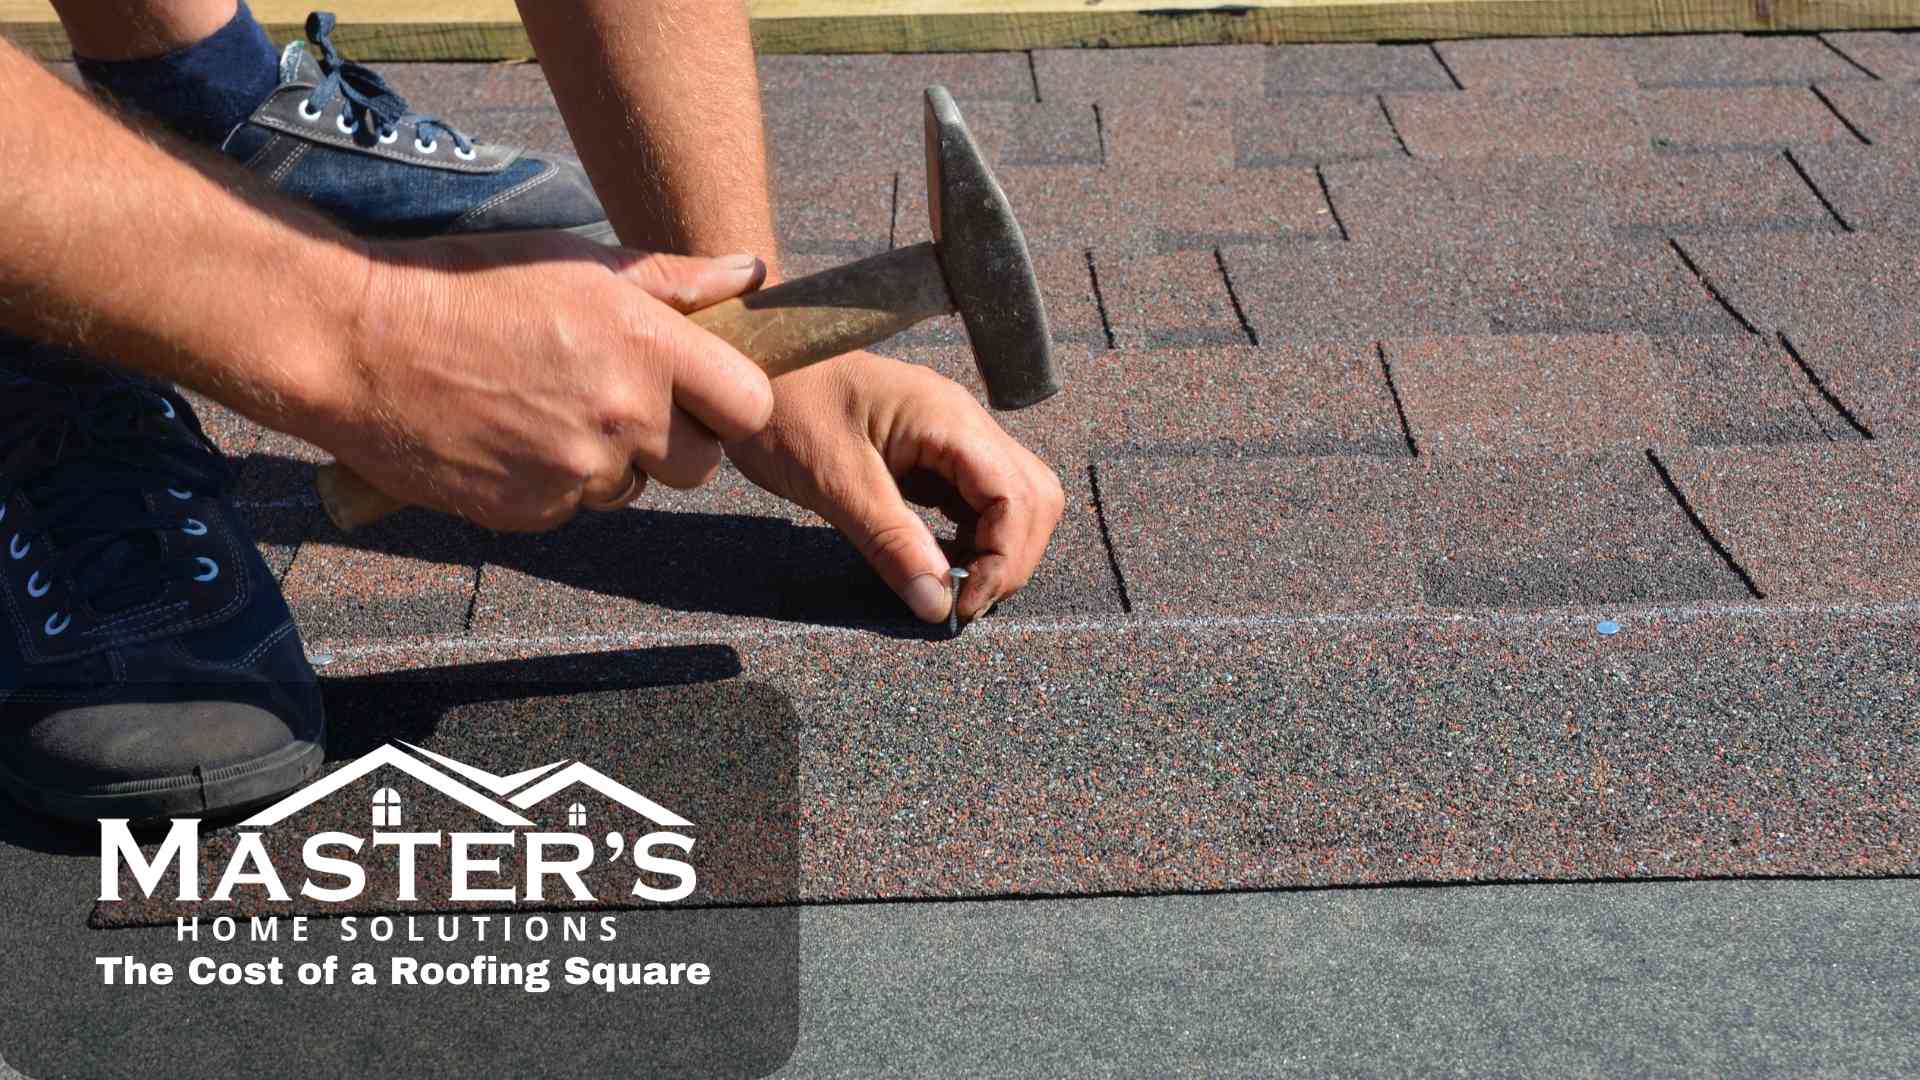 The Cost of a Roofing Square